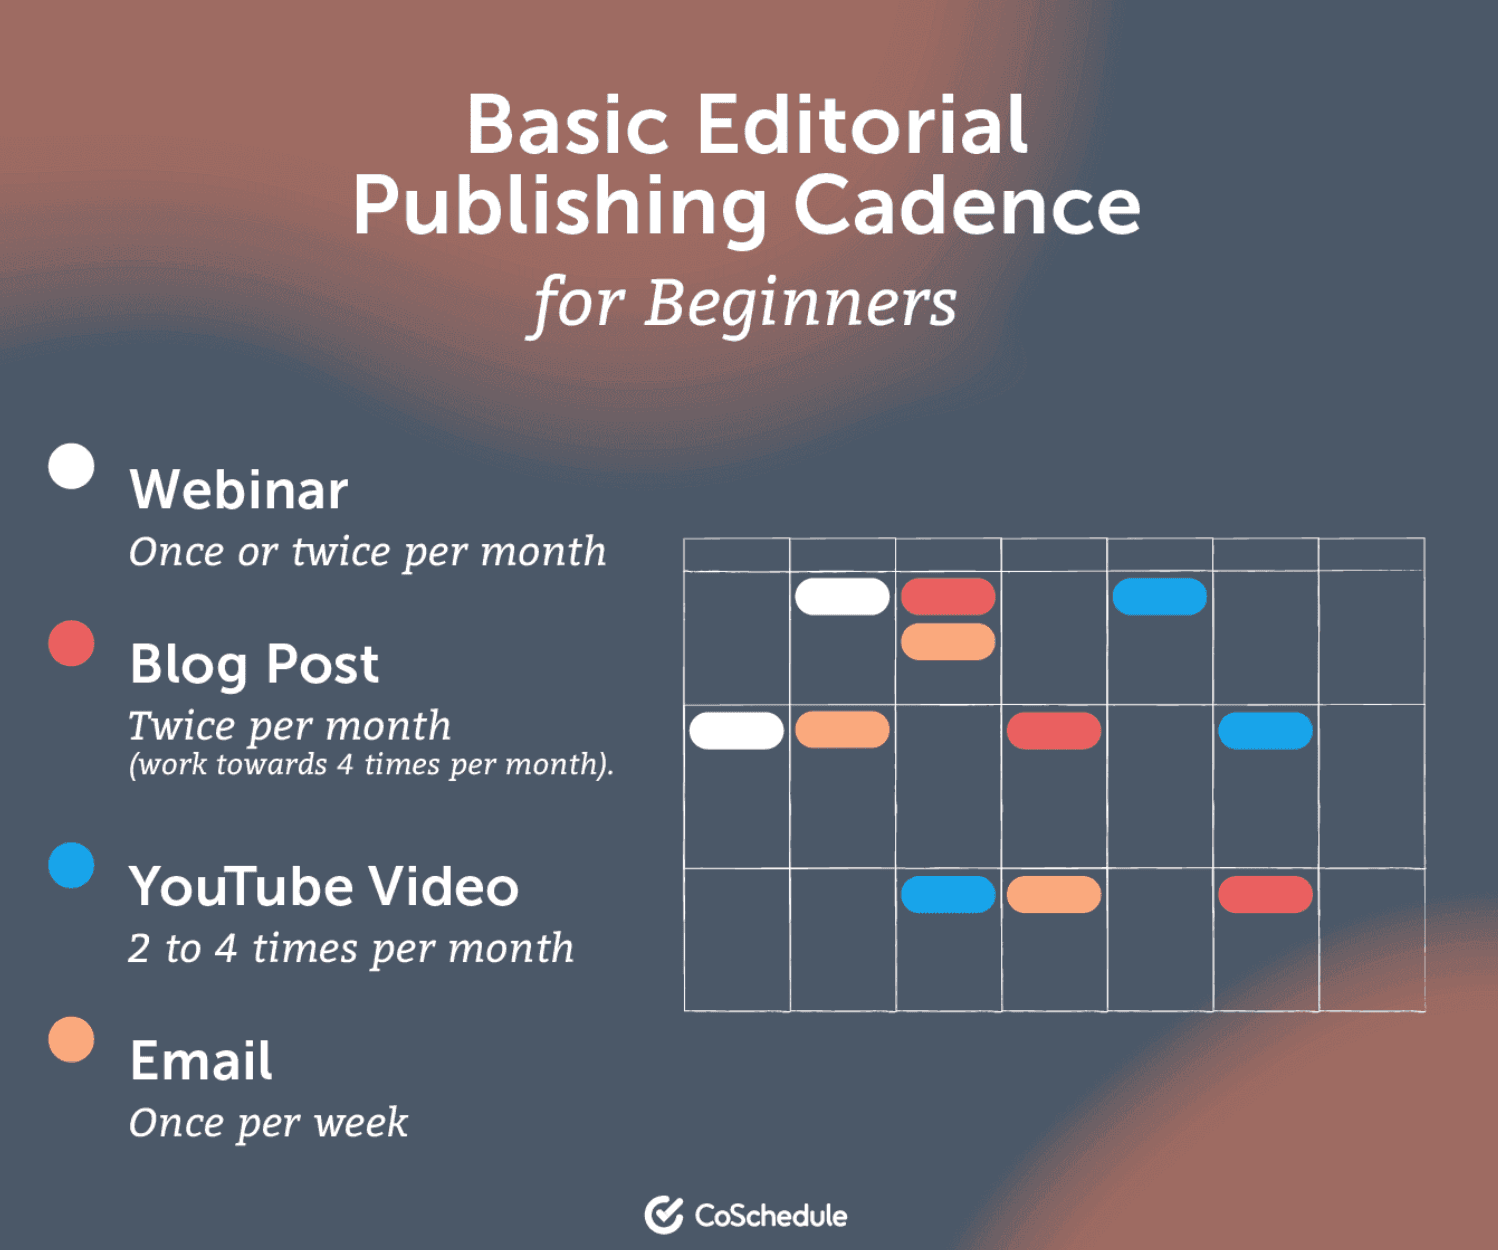 Basic editorial publishing guide from CoSchedule 